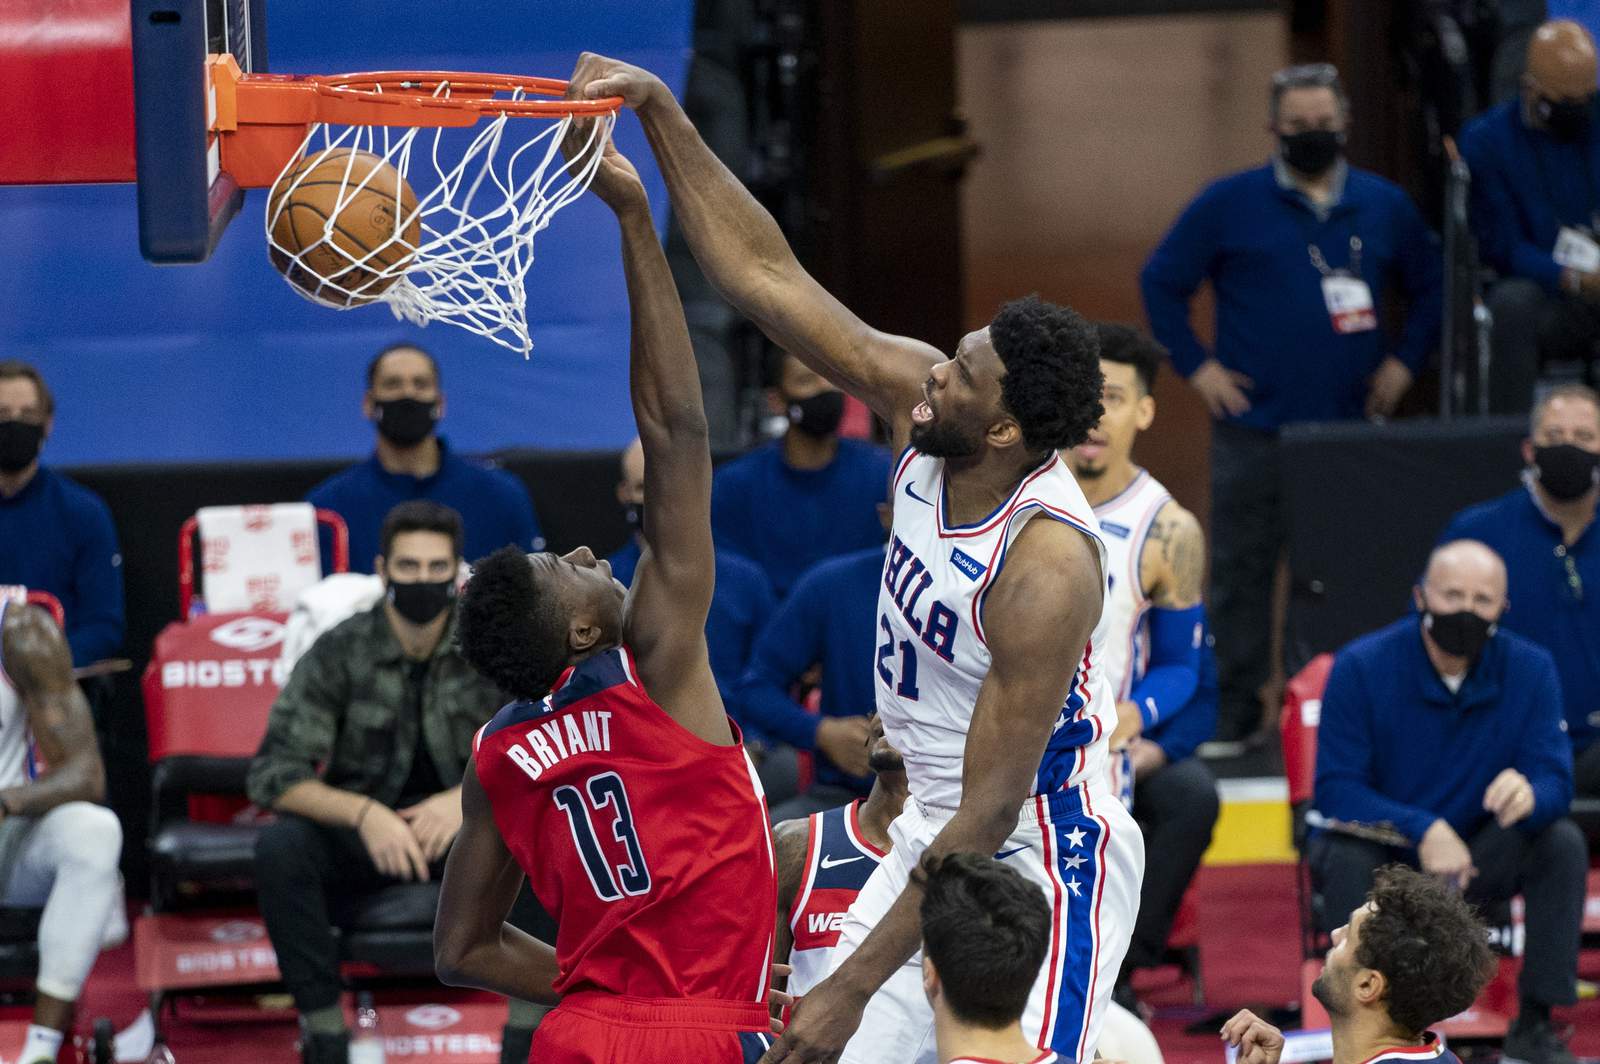 Sixers top Wizards despite Beal's record-tying 60 points